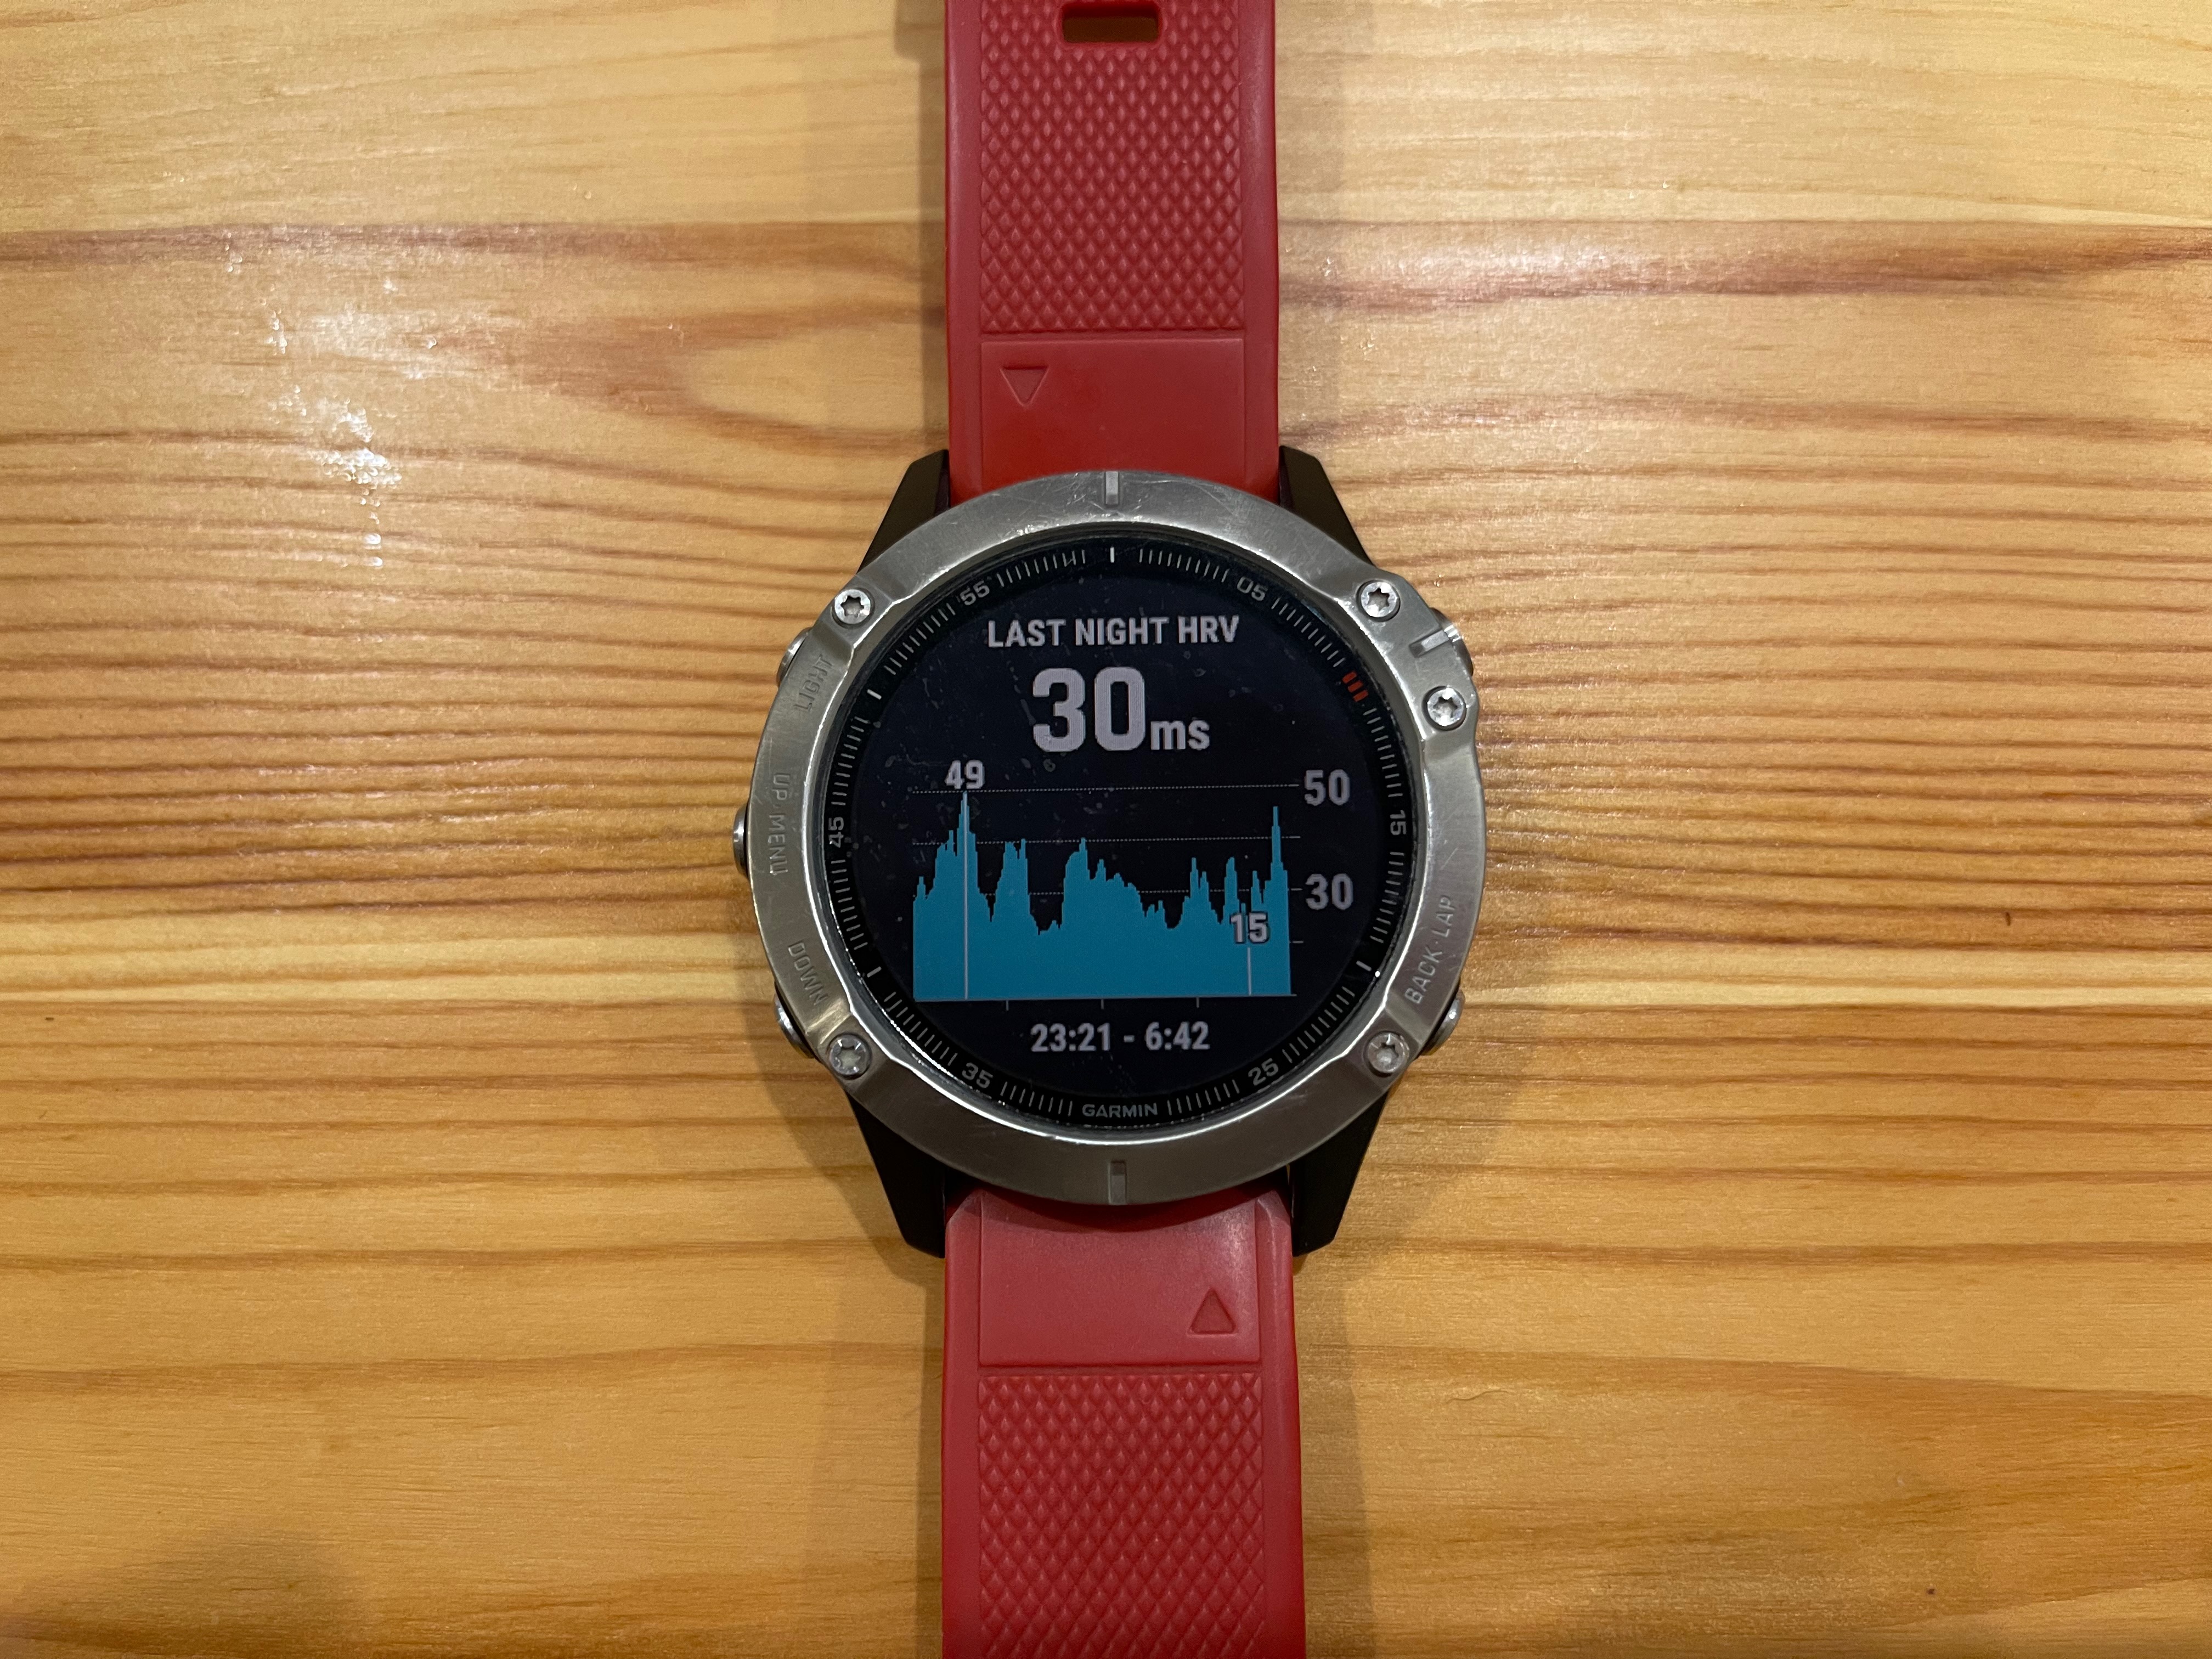 Picture of Garmin heart rate variability shown on the Fenix 6 watch